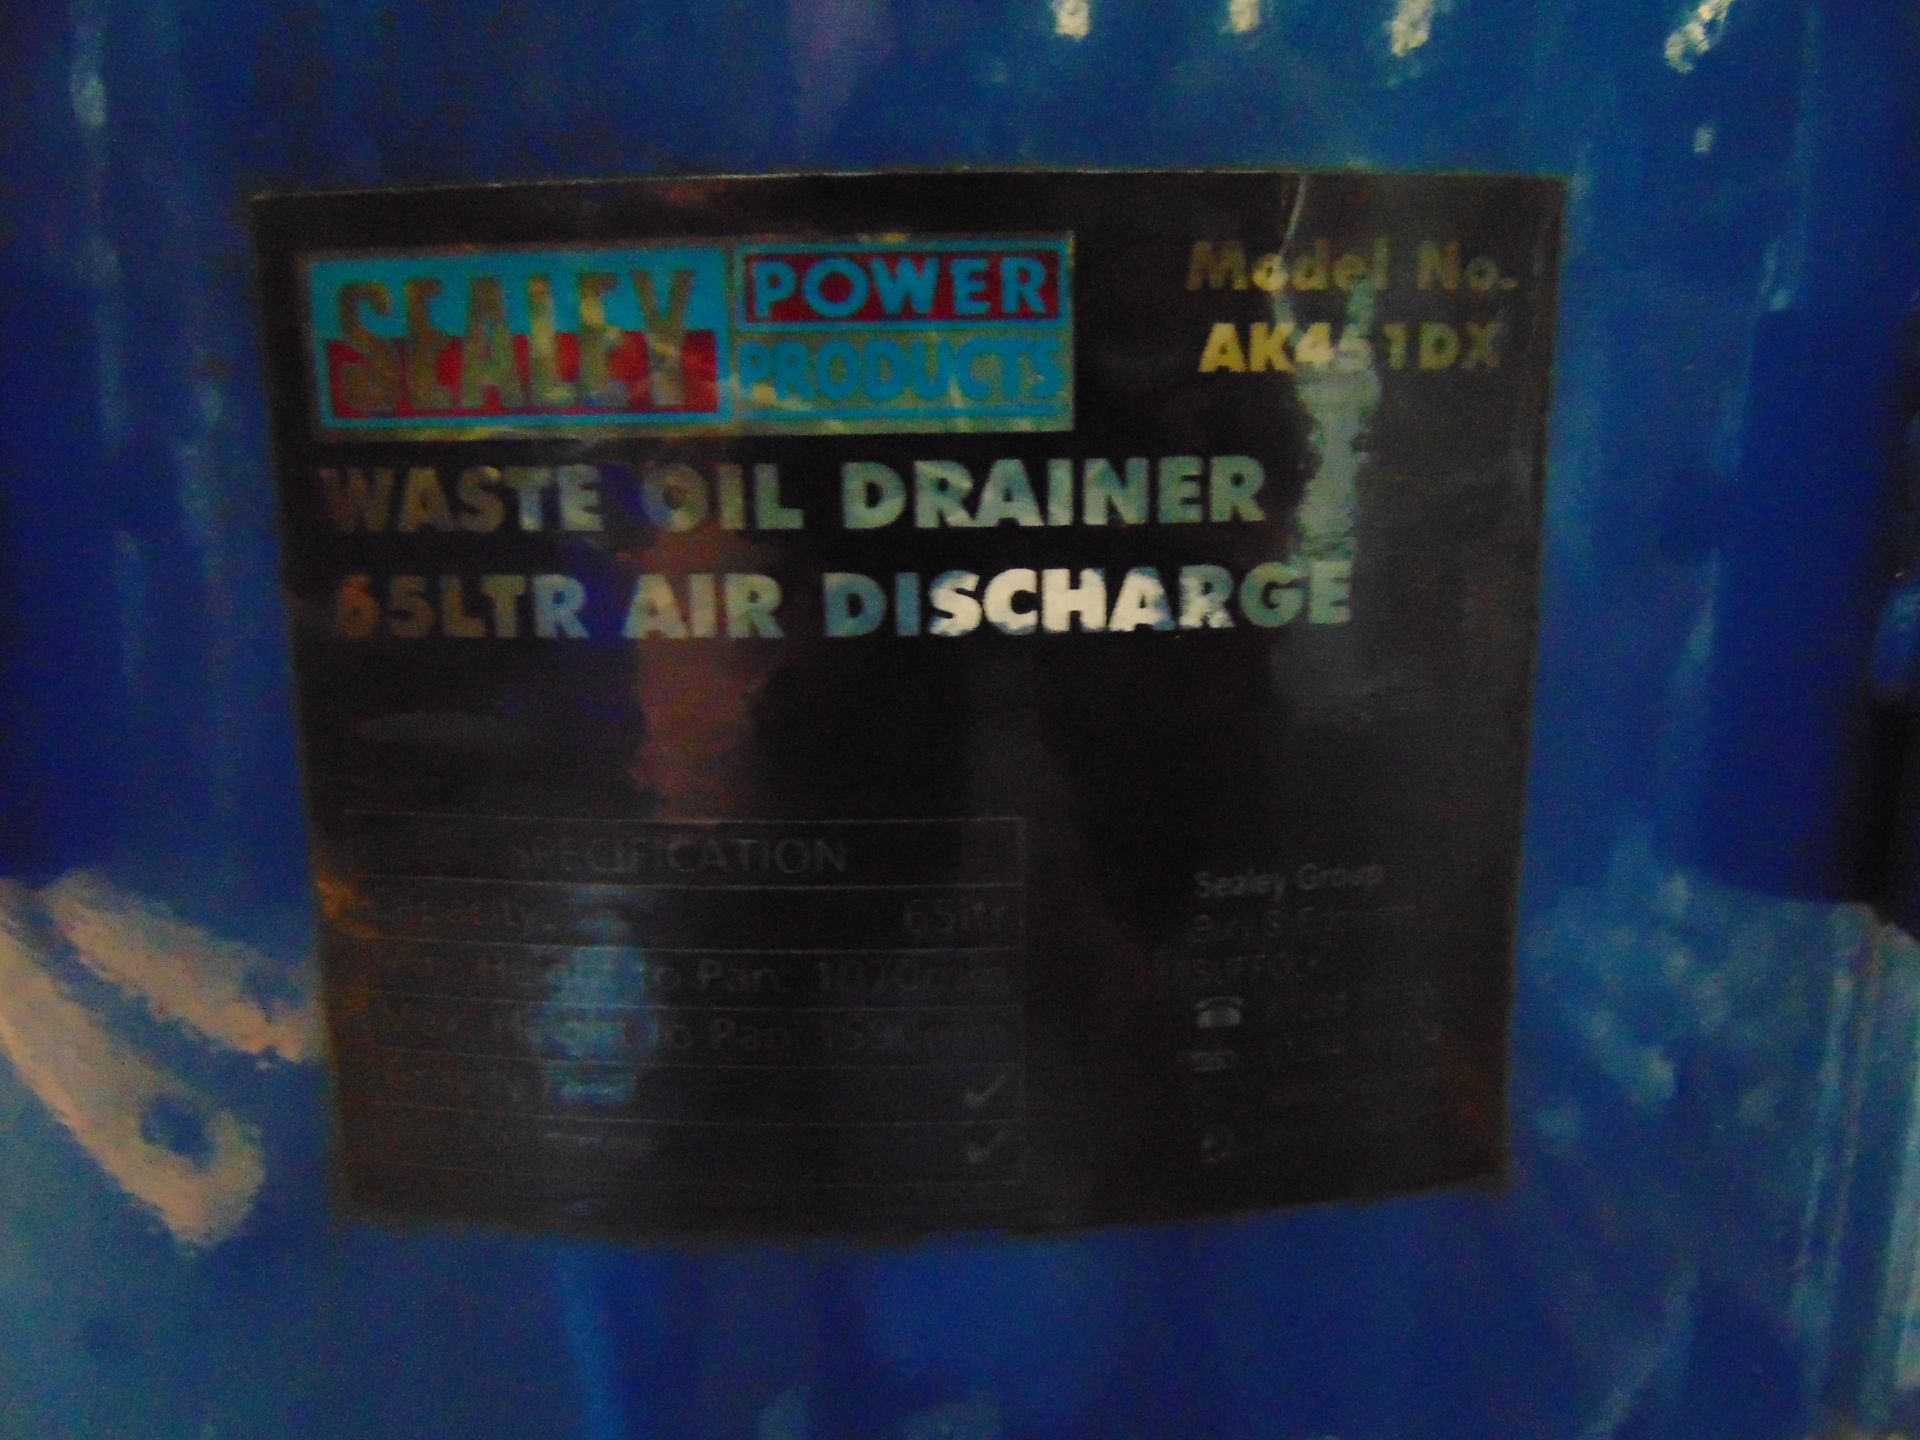 Sealey AK451DX 65ltr Air Discharge Waste Oil Drainer - Image 7 of 7